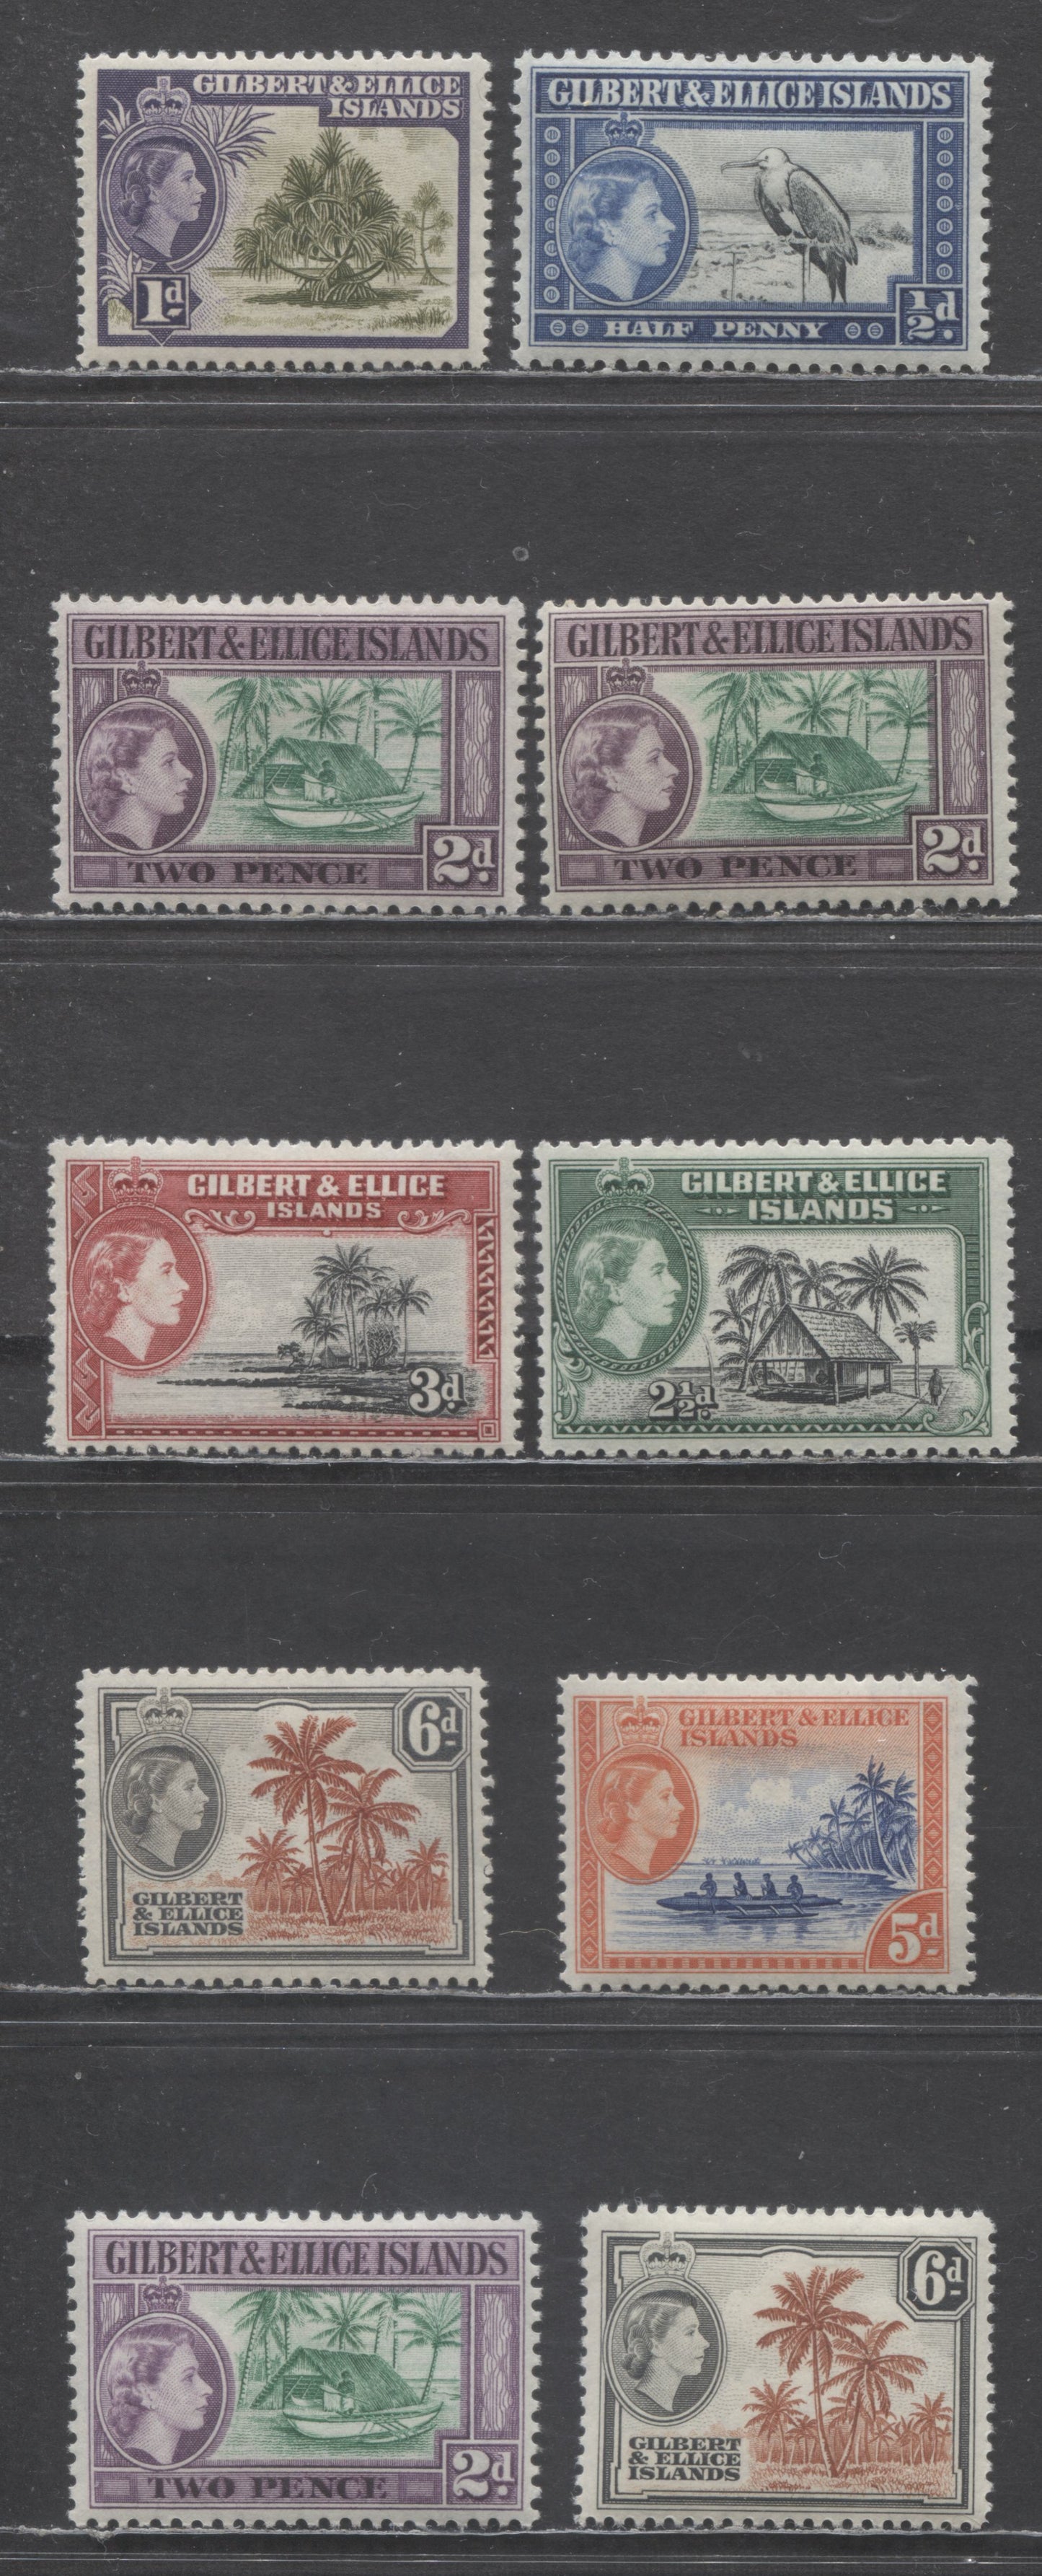 Lot 1 Gilbert & Ellice Islands SG#64 (SC# 61)-70 (SC# 67) 1956-1965 Pictorial Definitives, 10 F/VFOG Singles, Click on Listing to See ALL Pictures, Estimated Value $25